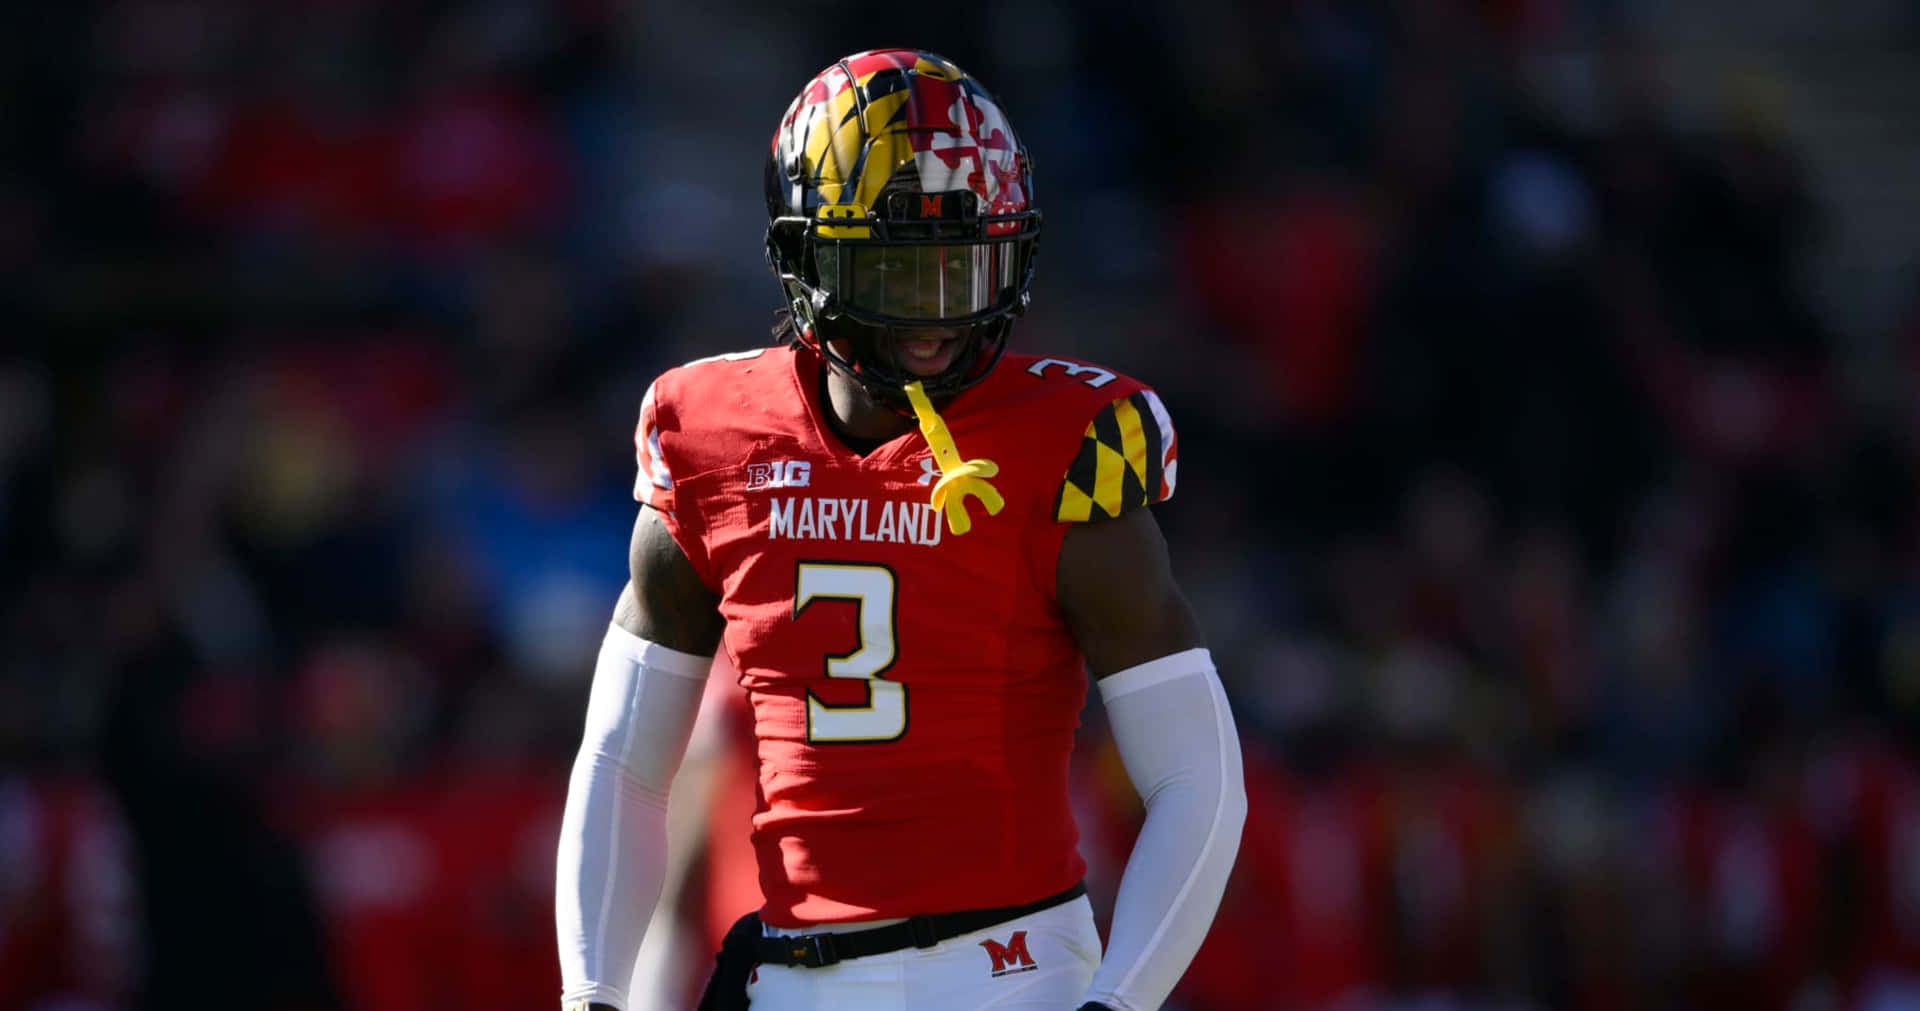 Maryland Football Player Number3 Wallpaper